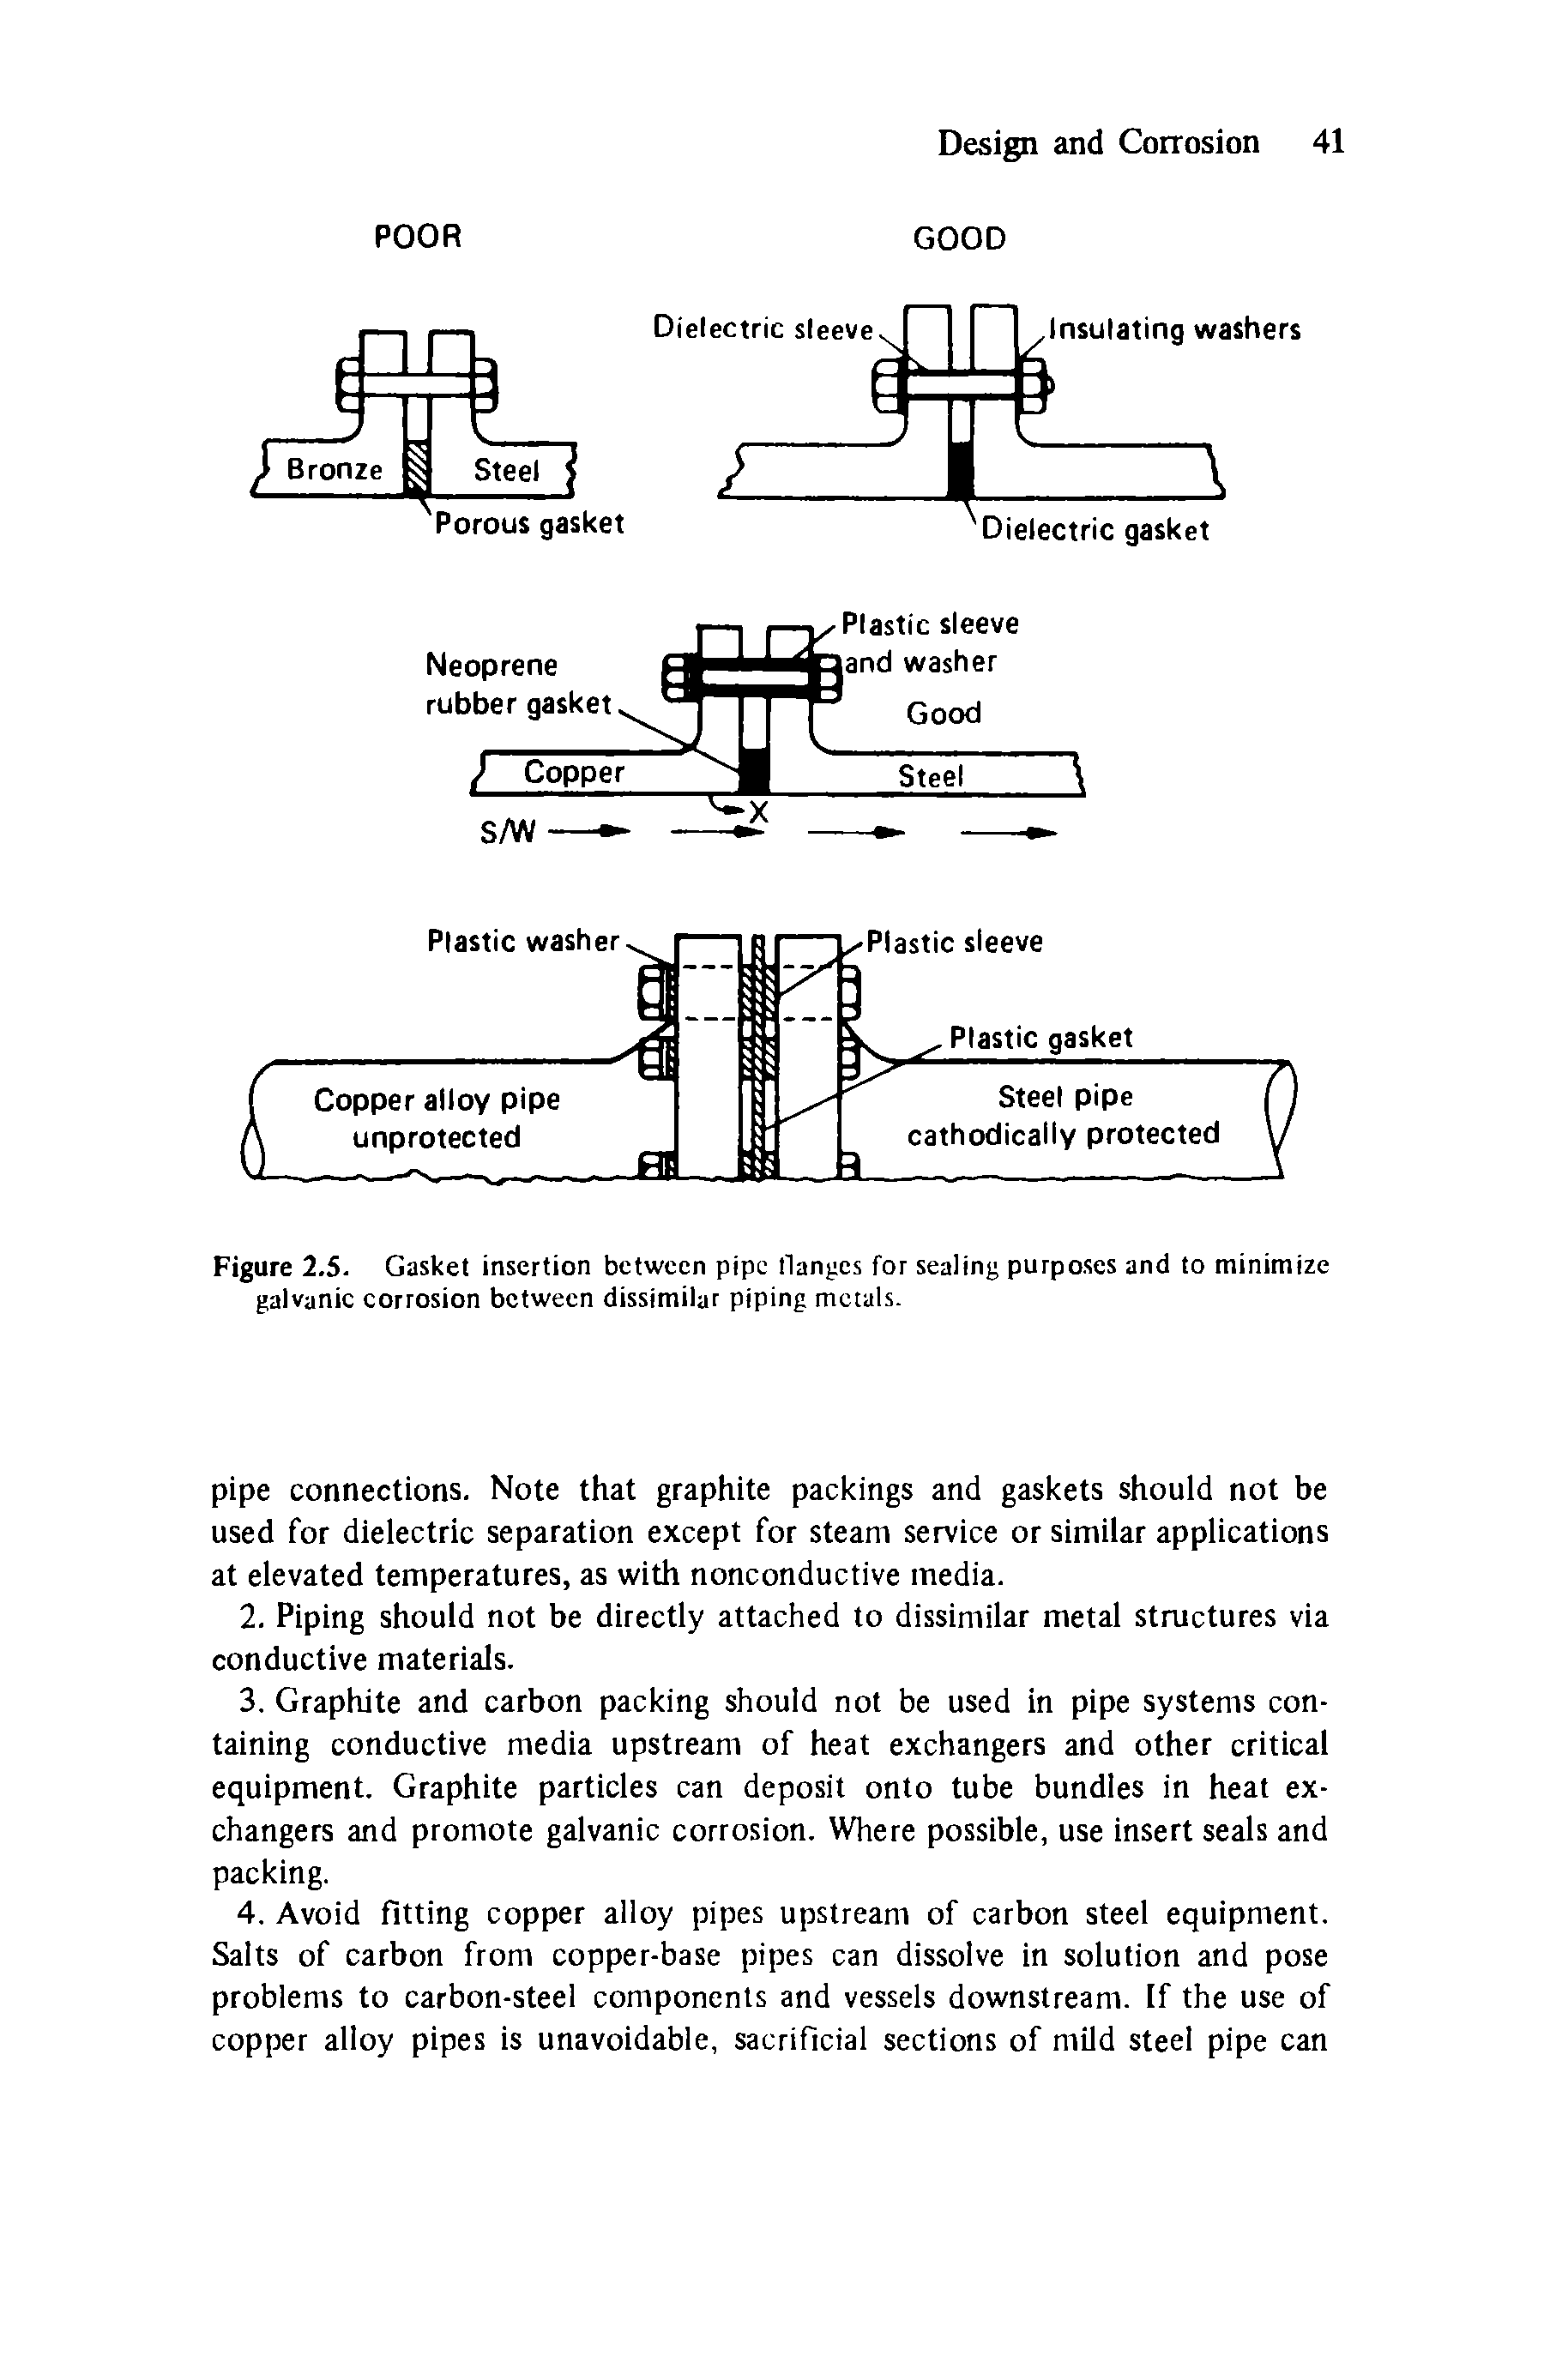 Figure 2.5. Gasket insertion between pipe llangcs for sealing purposes and to minimize galvanic corrosion between dissimilar piping metals.